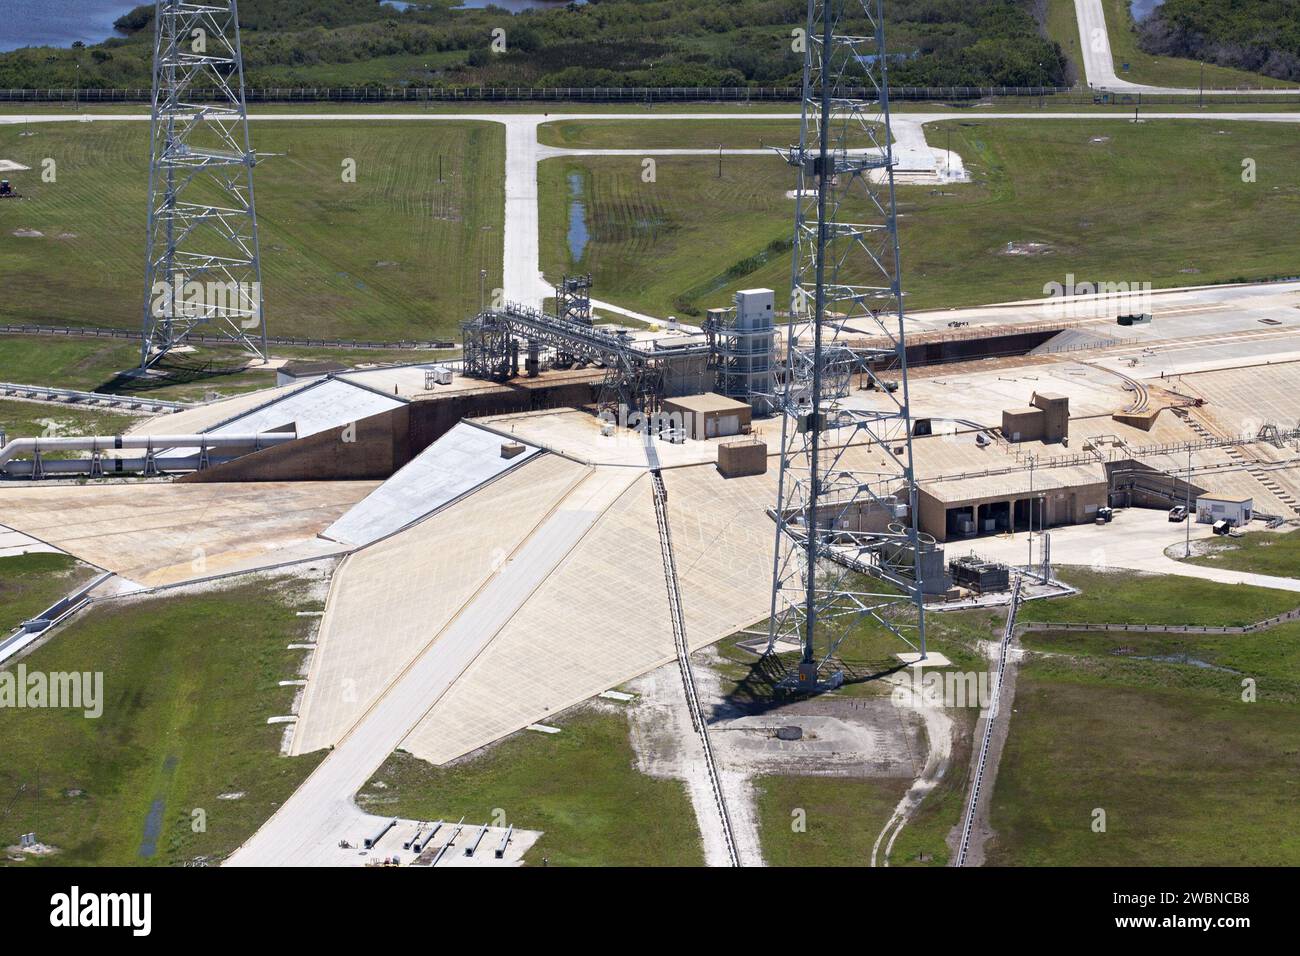 CAPE CANAVERAL, Fla. – An aerial view shows construction progress at Launch Pad 39B at NASA’s Kennedy Space Center in Florida. A new elevator has been constructed on the surface of the pad and the crawlerway leading up to the surface is being repaired. Repairs also are being made to the crawler track panels and catacomb roof below on either side of the flame trench. Also in view are two of the three tall lightning towers that surround the pad. Upgrades are underway at Pad B and other facilities in the Launch Complex 39 area. The Ground Systems Development and Operations, or GSDO, Program offic Stock Photo